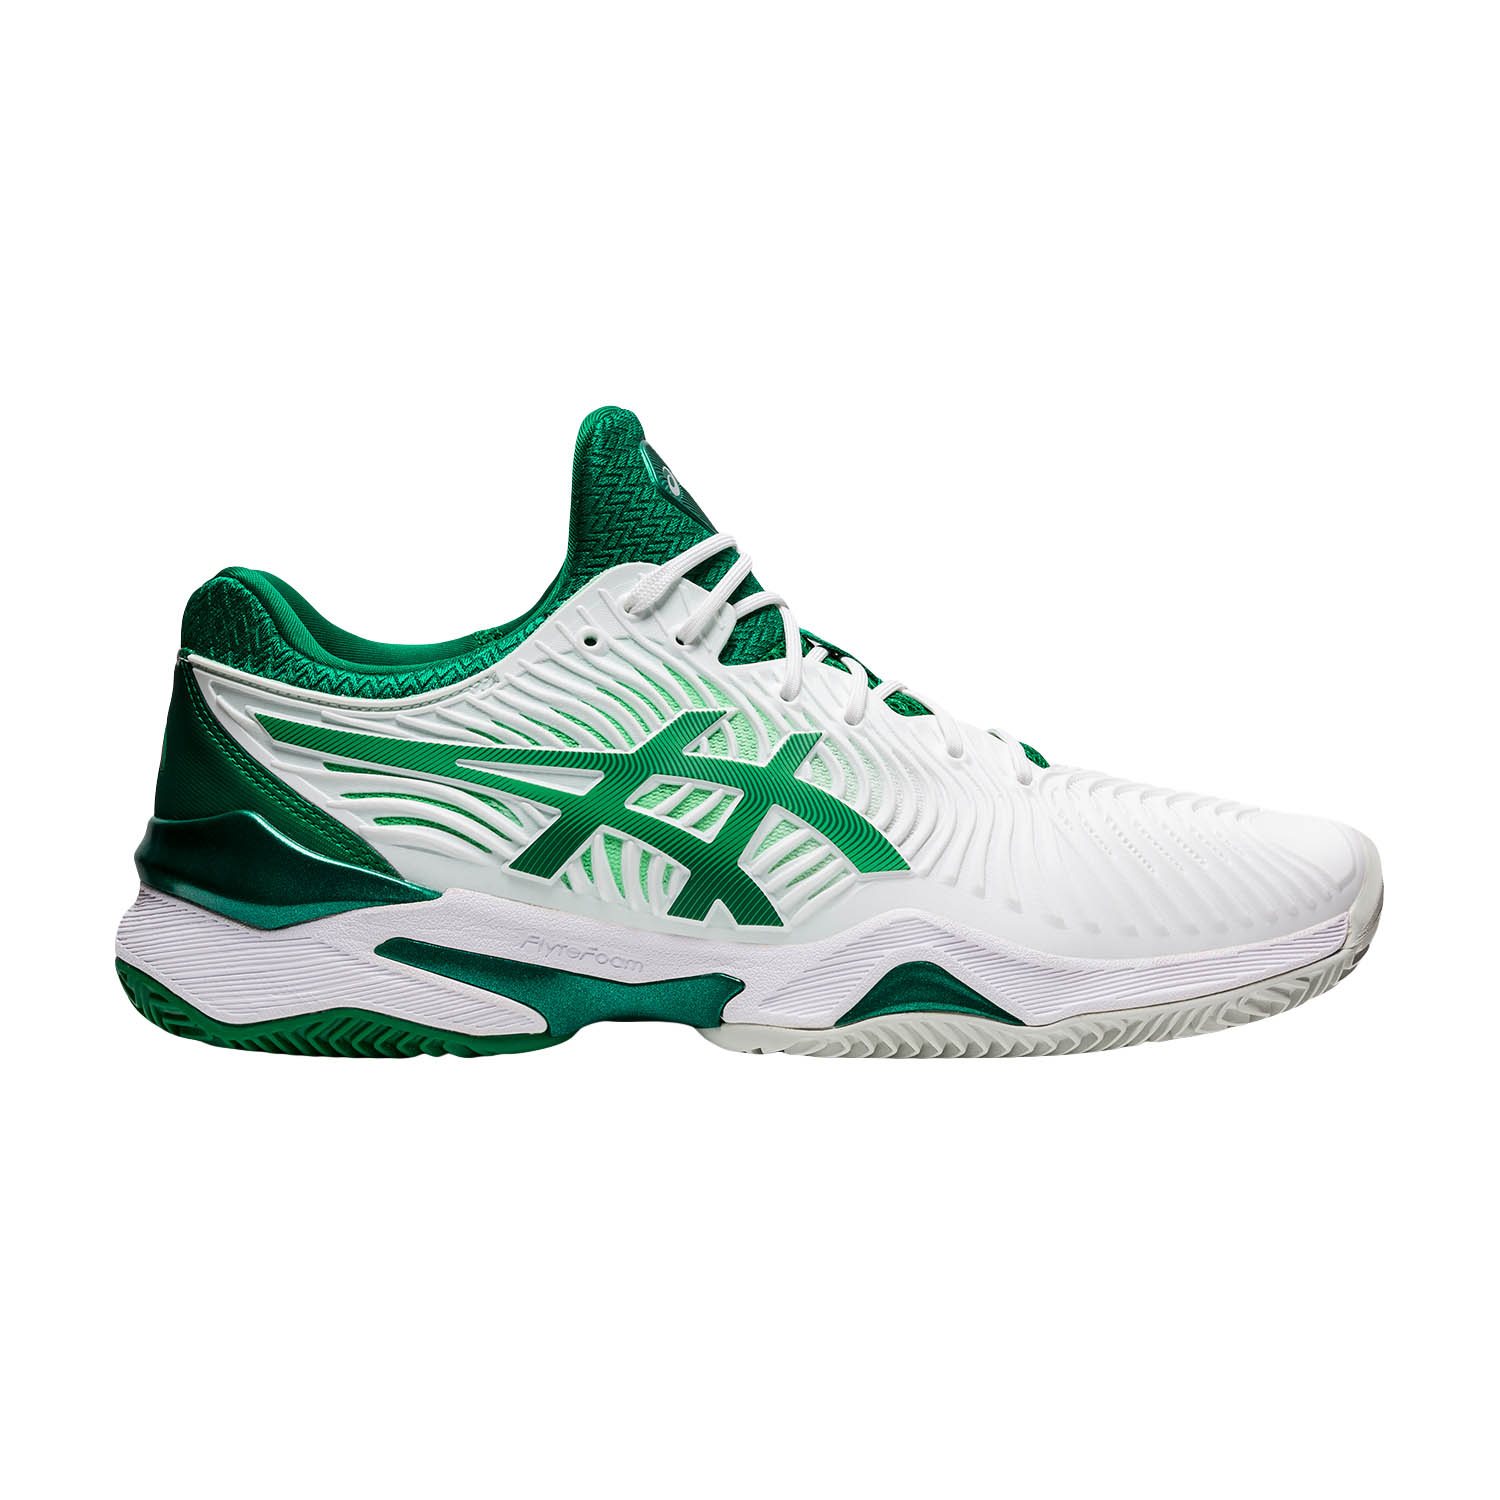 asics tennis clay court shoes